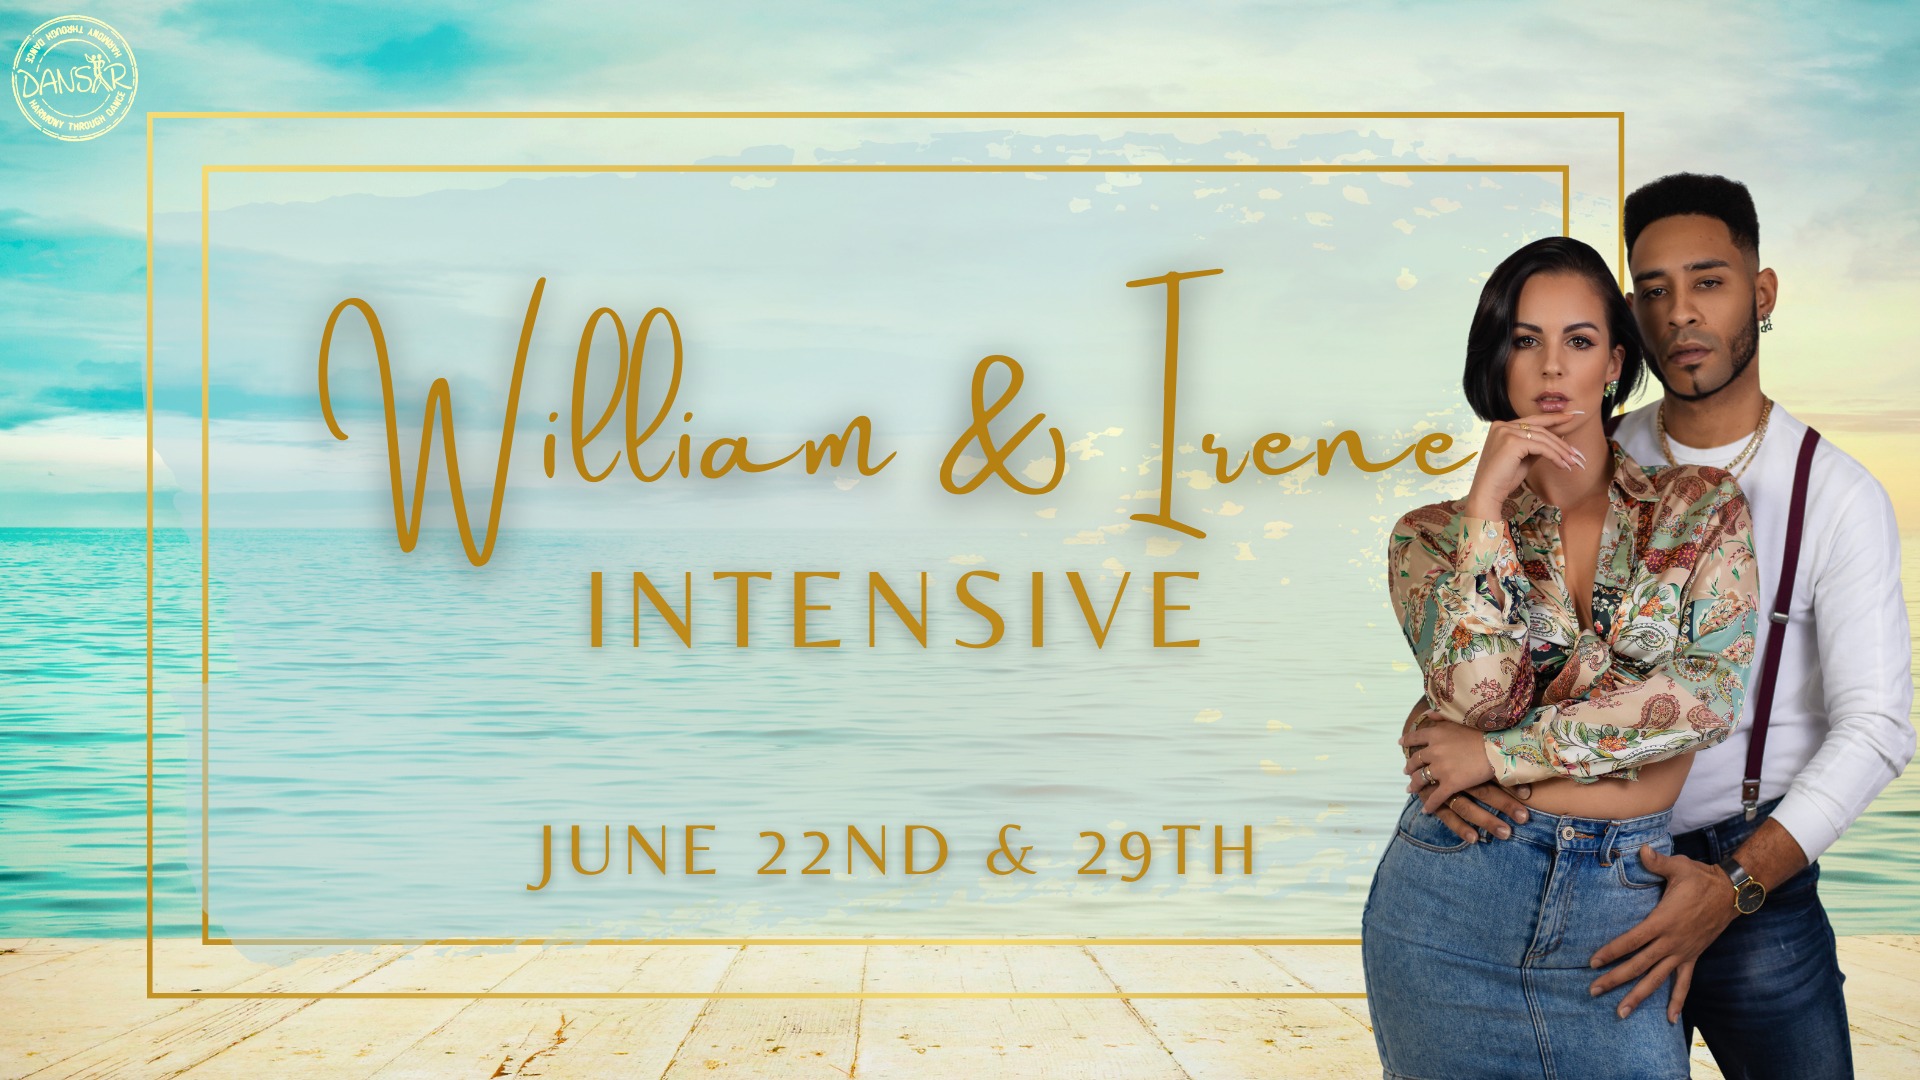 William and Irene are coming to the Bay to teach a progressive intensive on Wednesdays June 22nd and 29th!